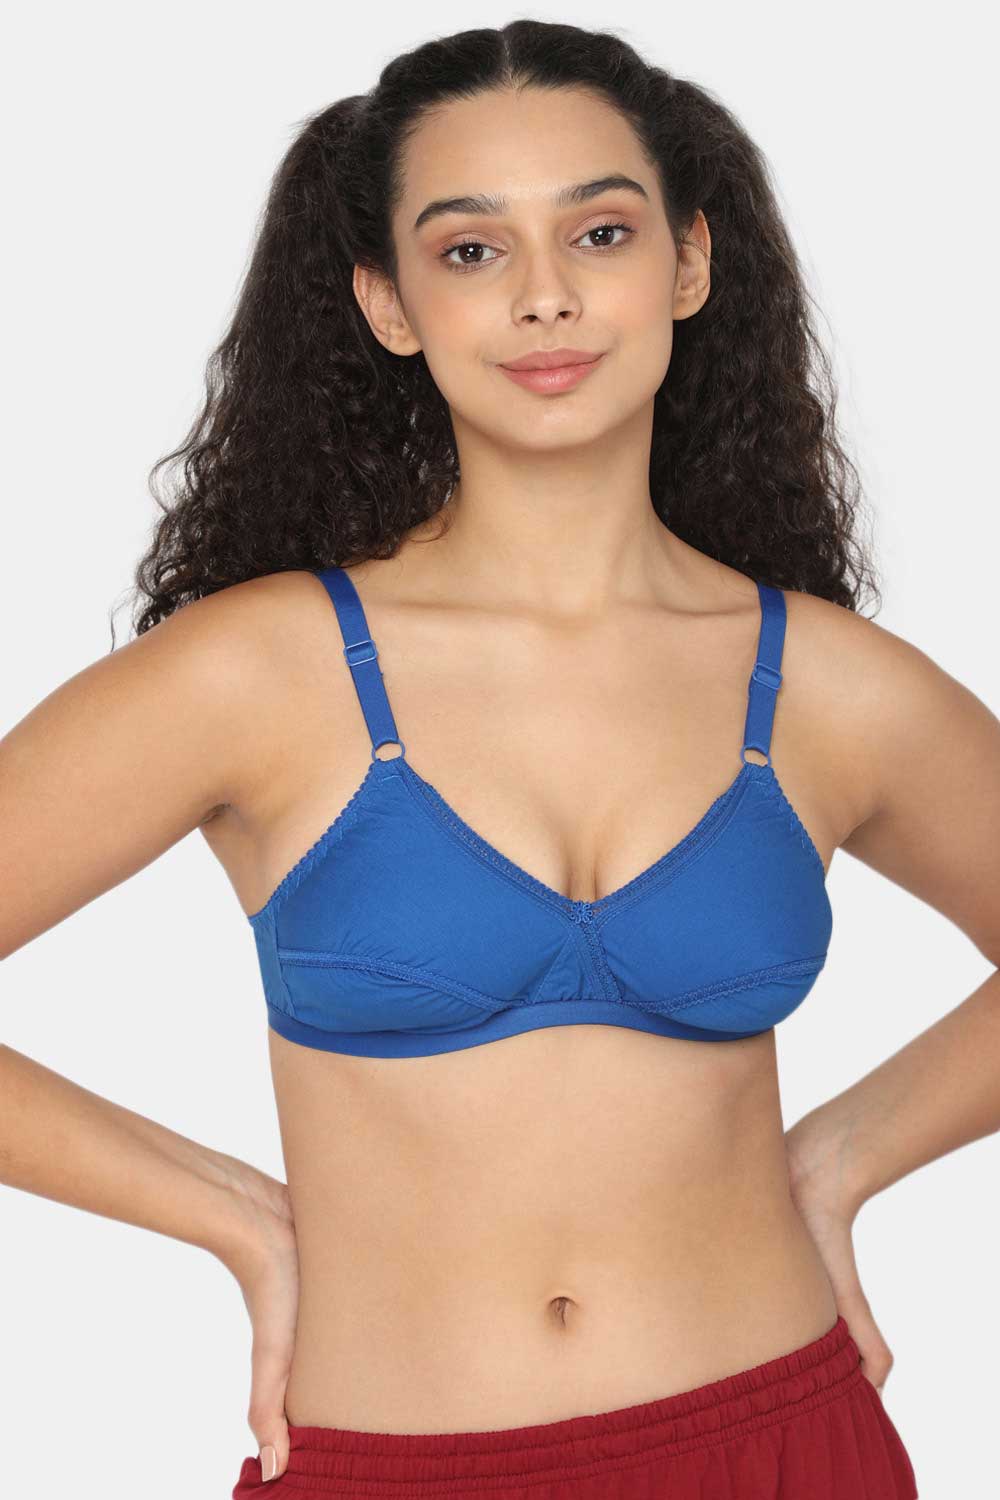 Naiduhall Saree Bra - Lovable - Other Colors Size   30B Color BLUE